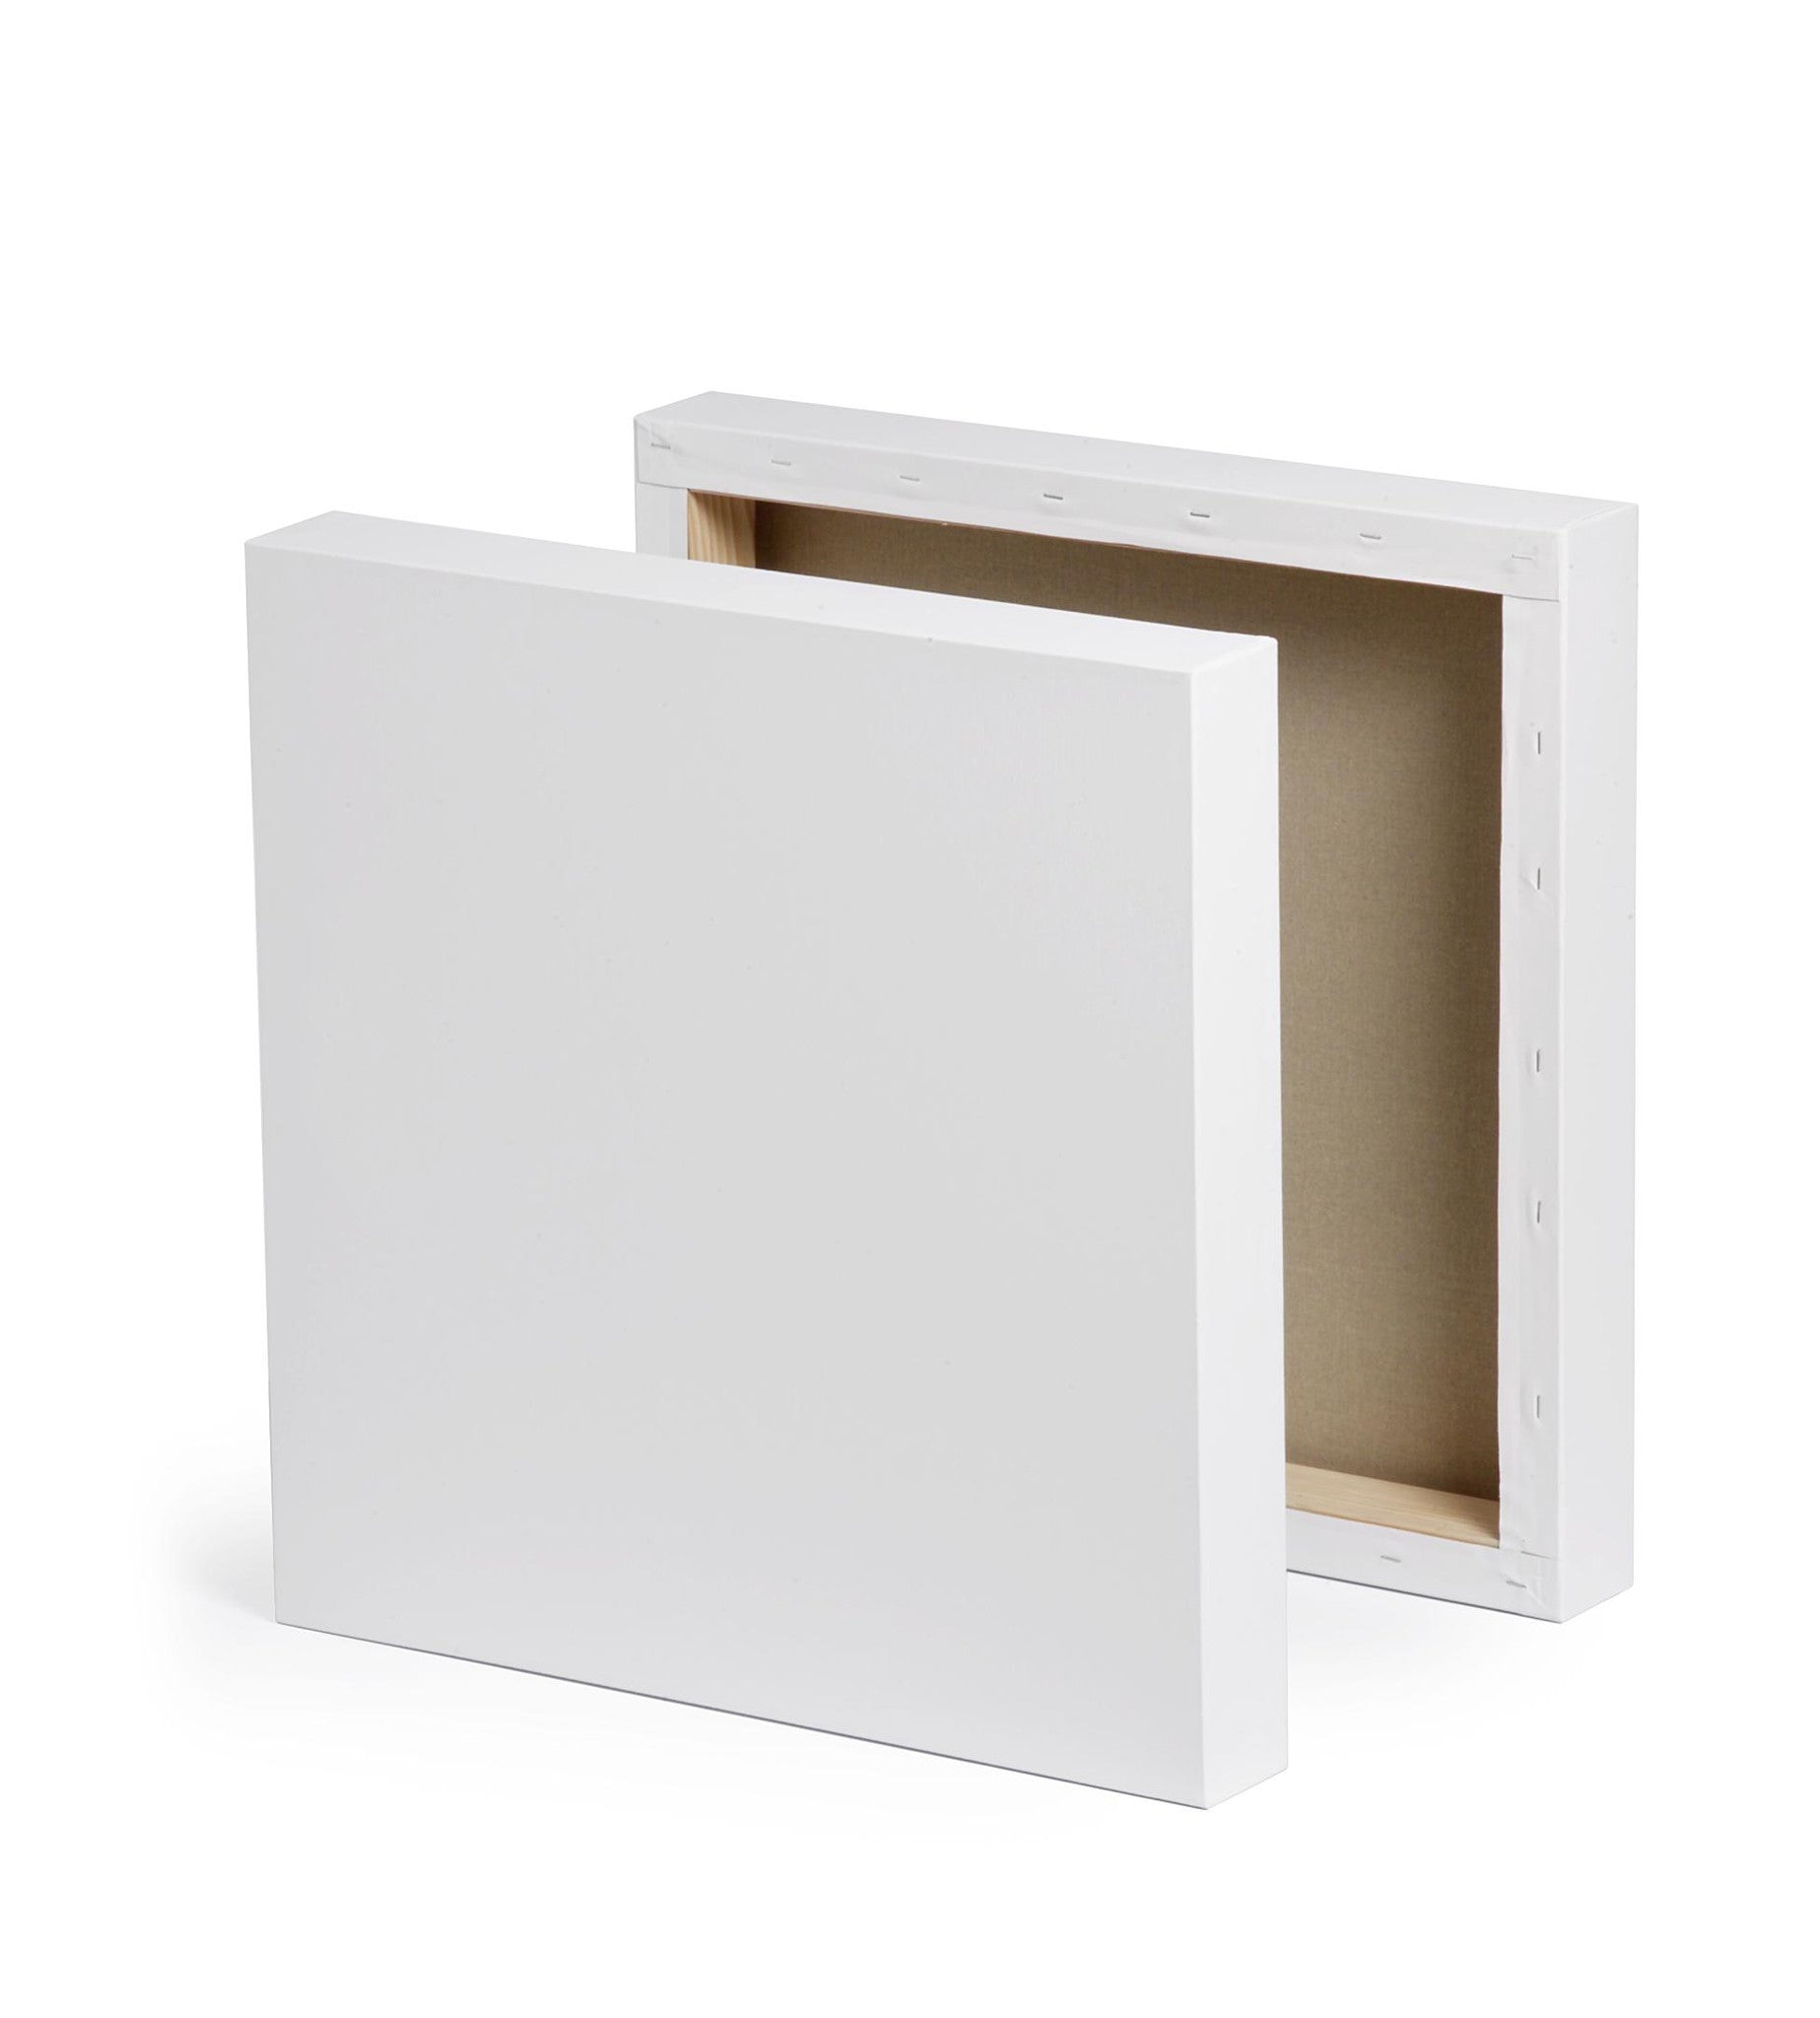 CRAFTERS SQUARE 8X8 ARTIST CANVAS FOR PAINTING OR SKETCHING, BLANK CANVAS